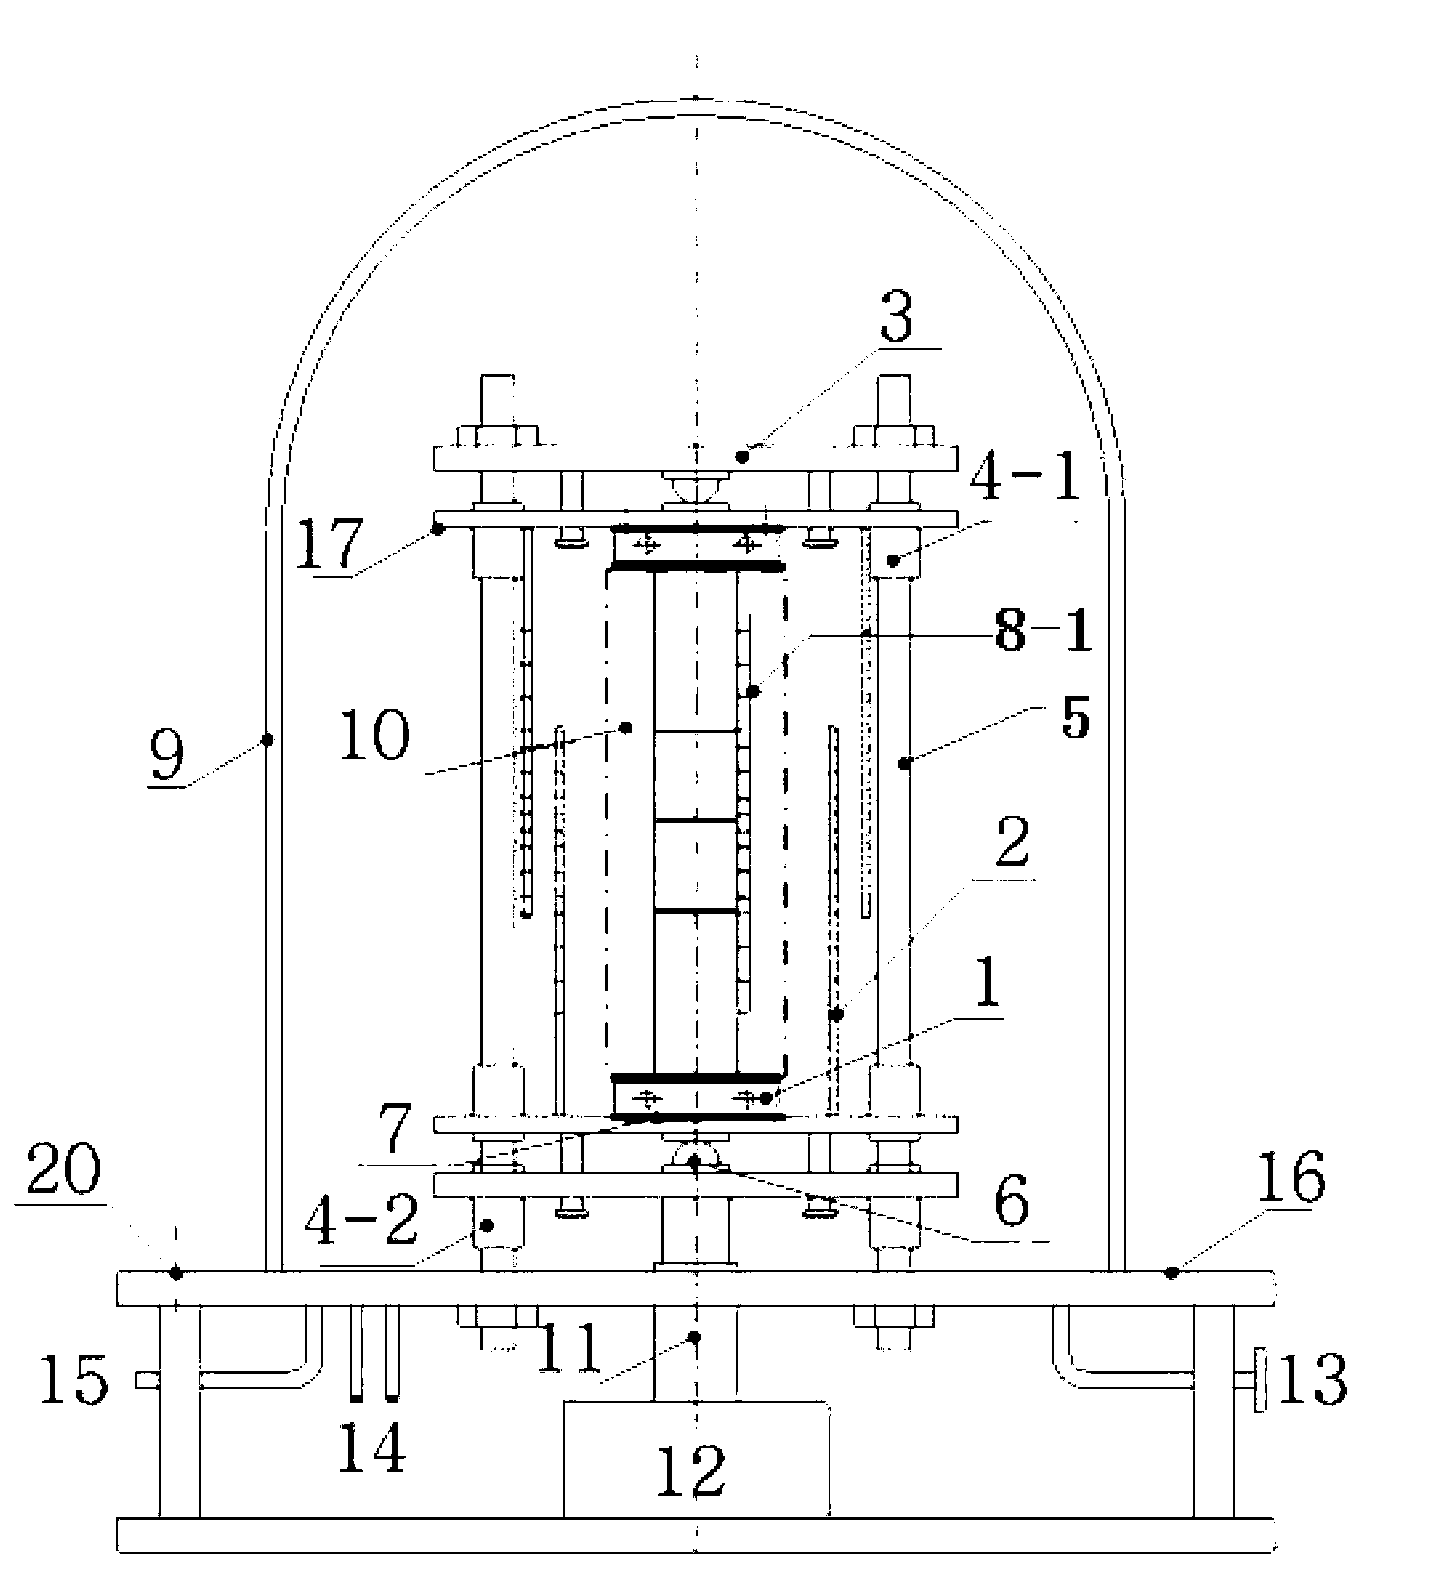 Heat conduction coefficient and contact thermal resistance testing device